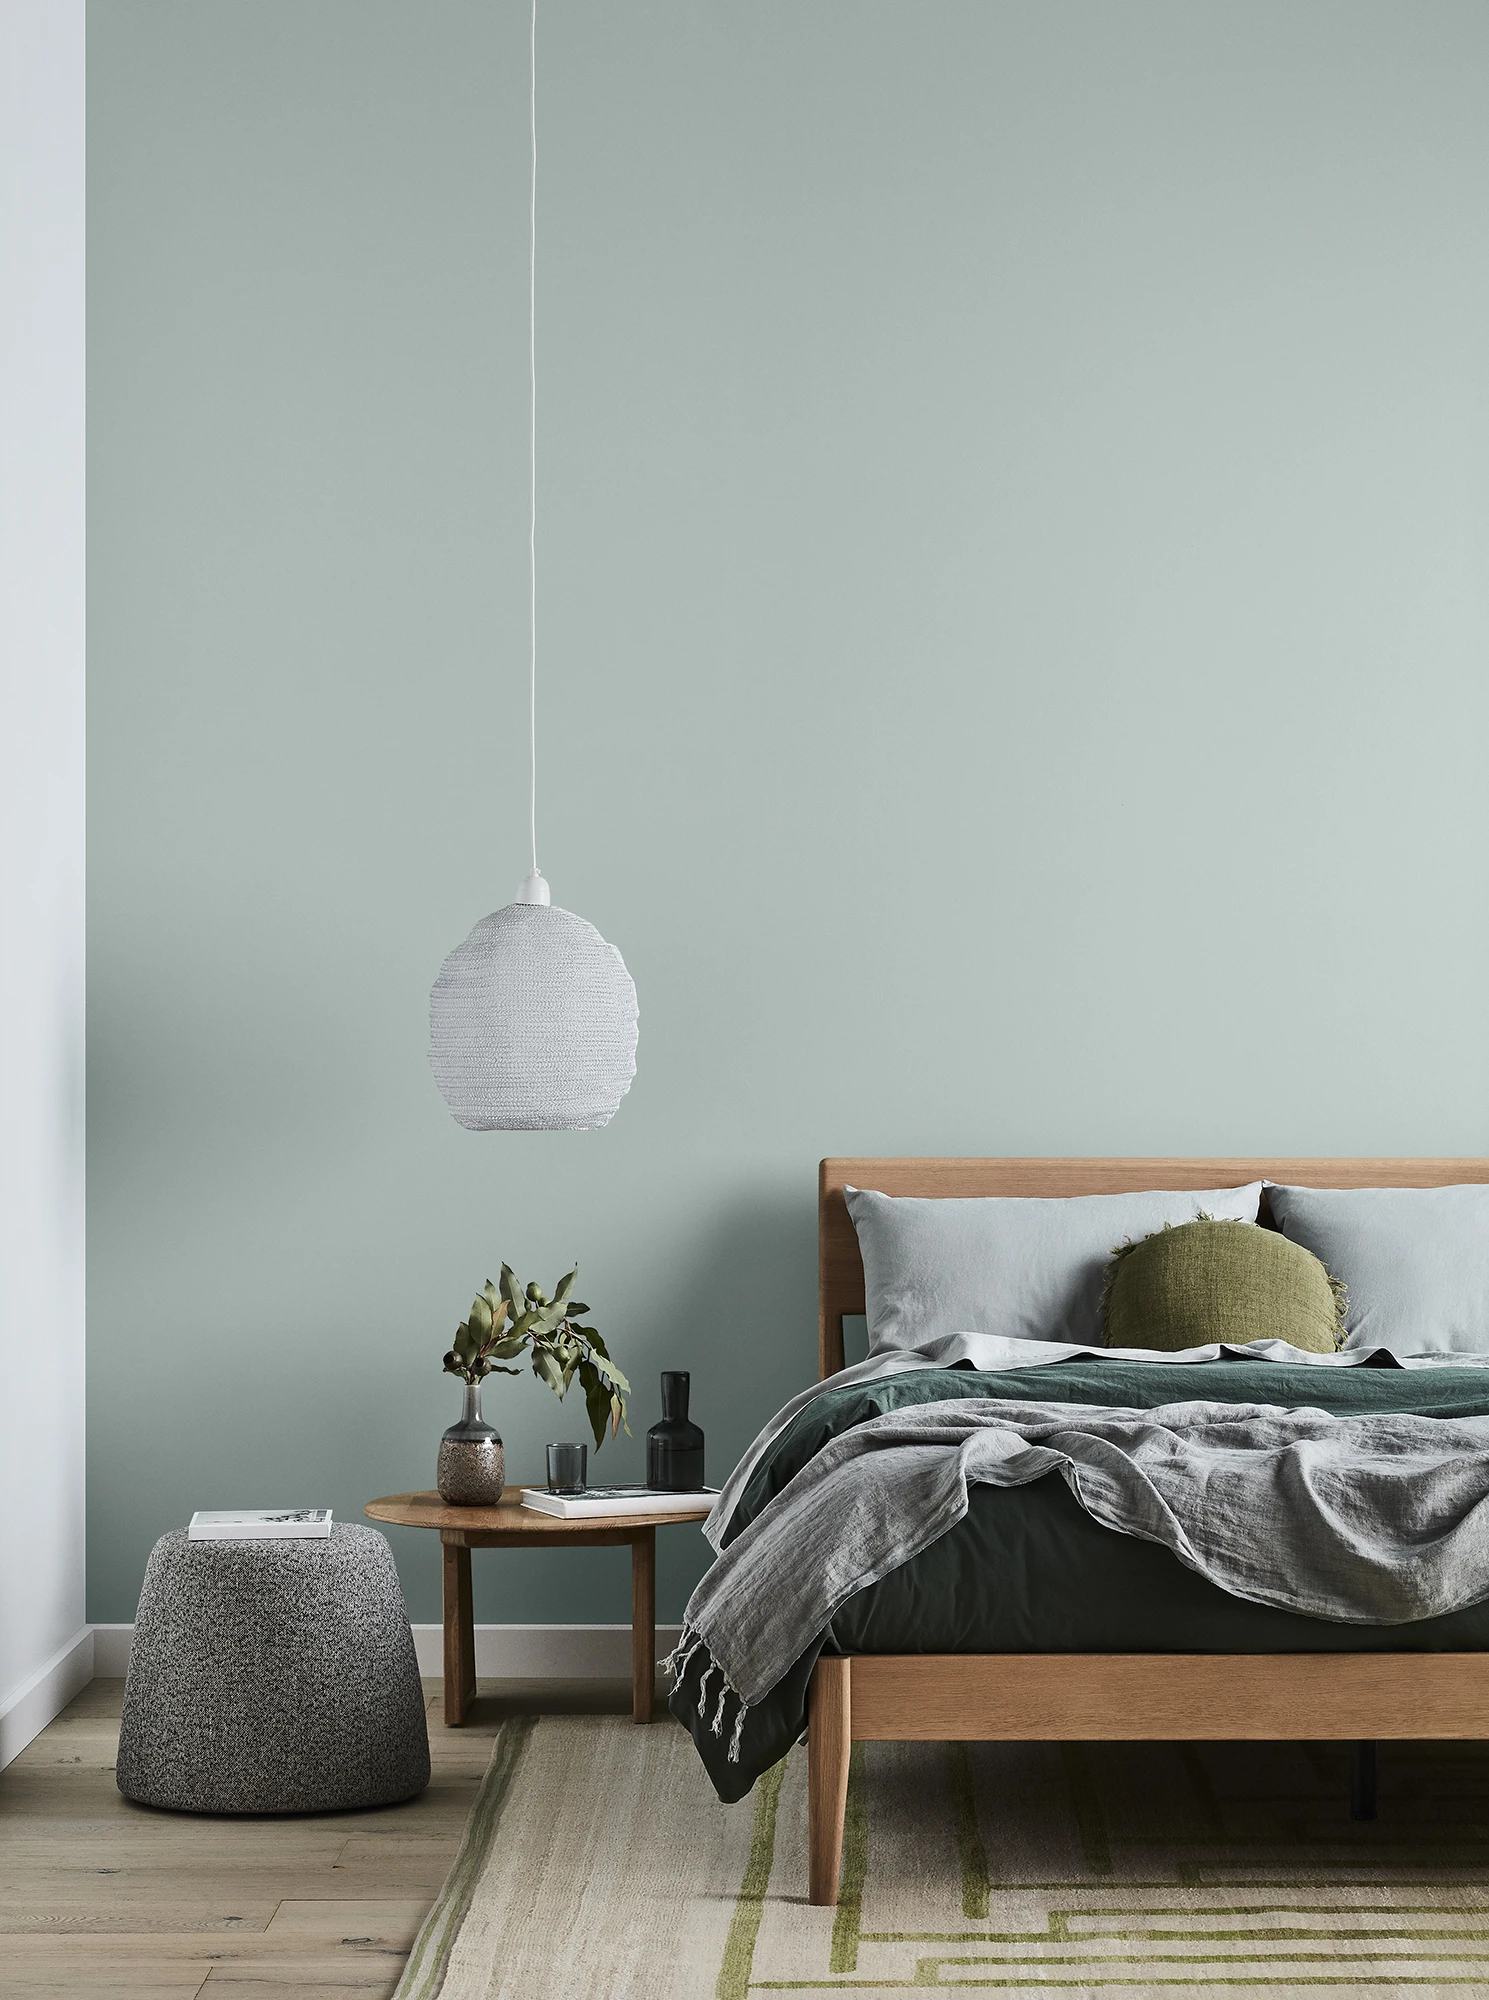 Bed in front of green wall. Side table with plant on it and a hanging white light